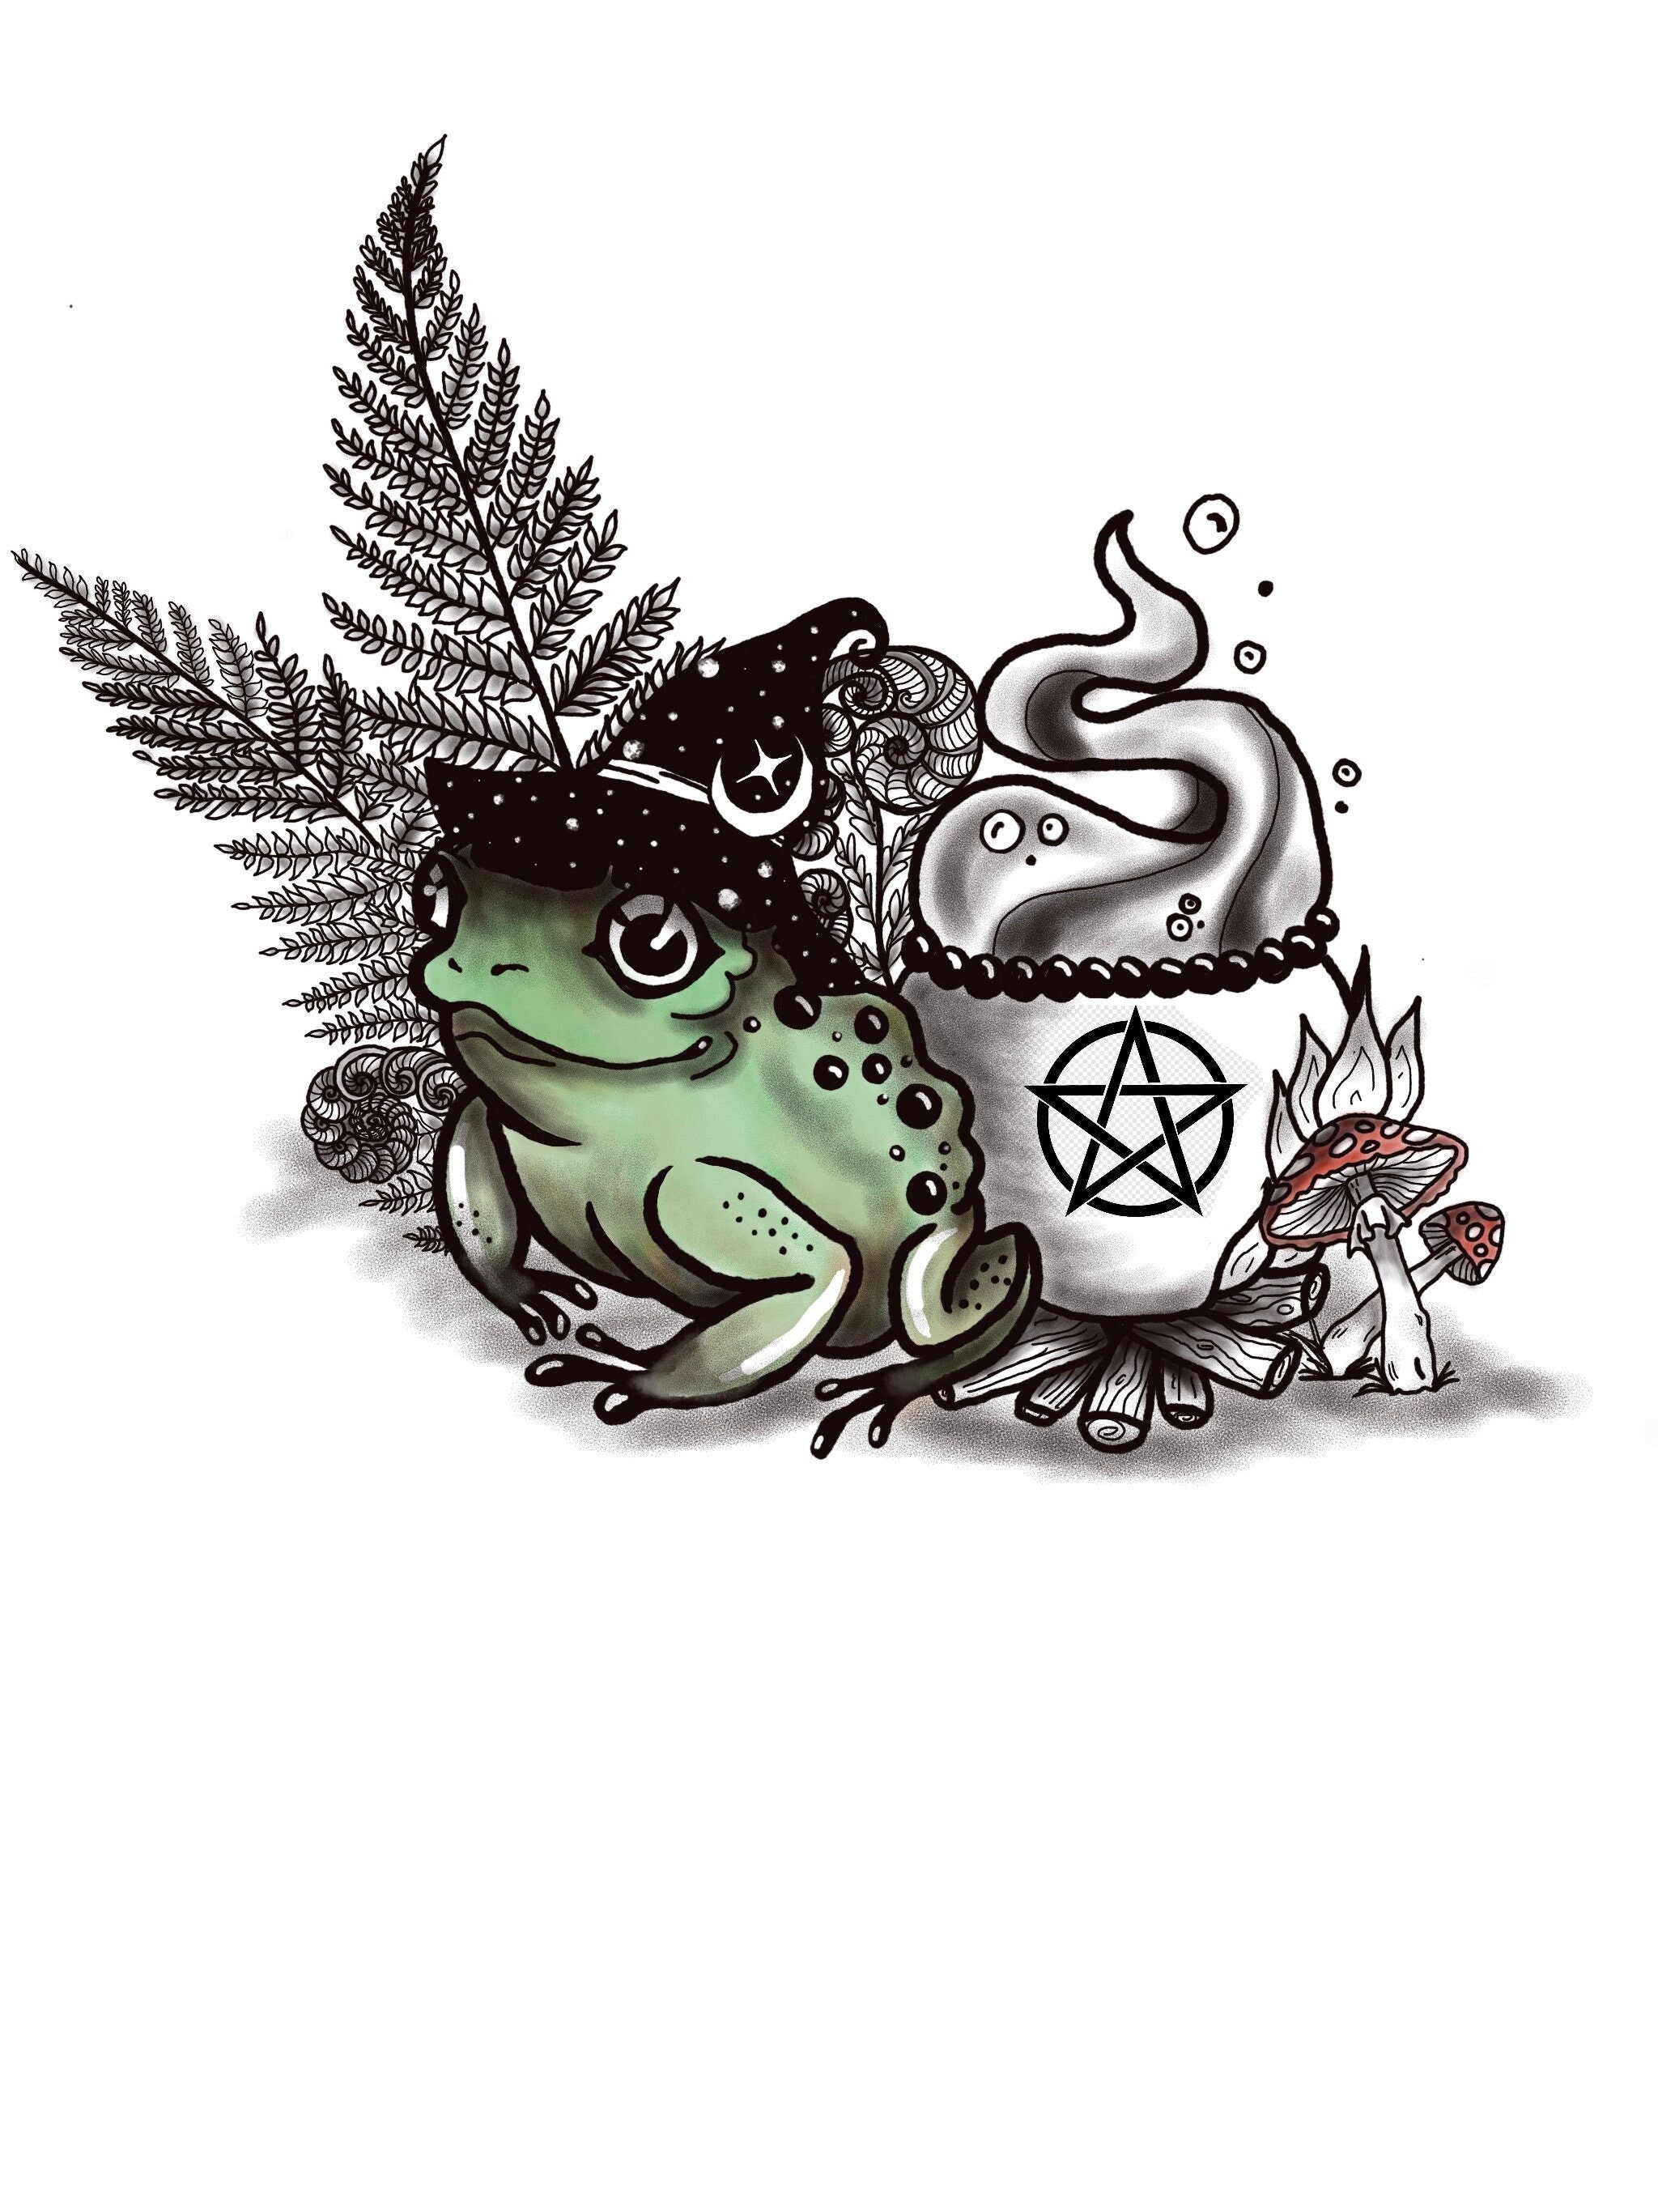 ZeroFiveTattoo  Repost  lgnjgraphics Out of the lucent blizzard  came forth the Crystal Skull Wizard  Frog wizard tattoo from my  flashbook done zerofivetattoo Zagreb I have some free space this